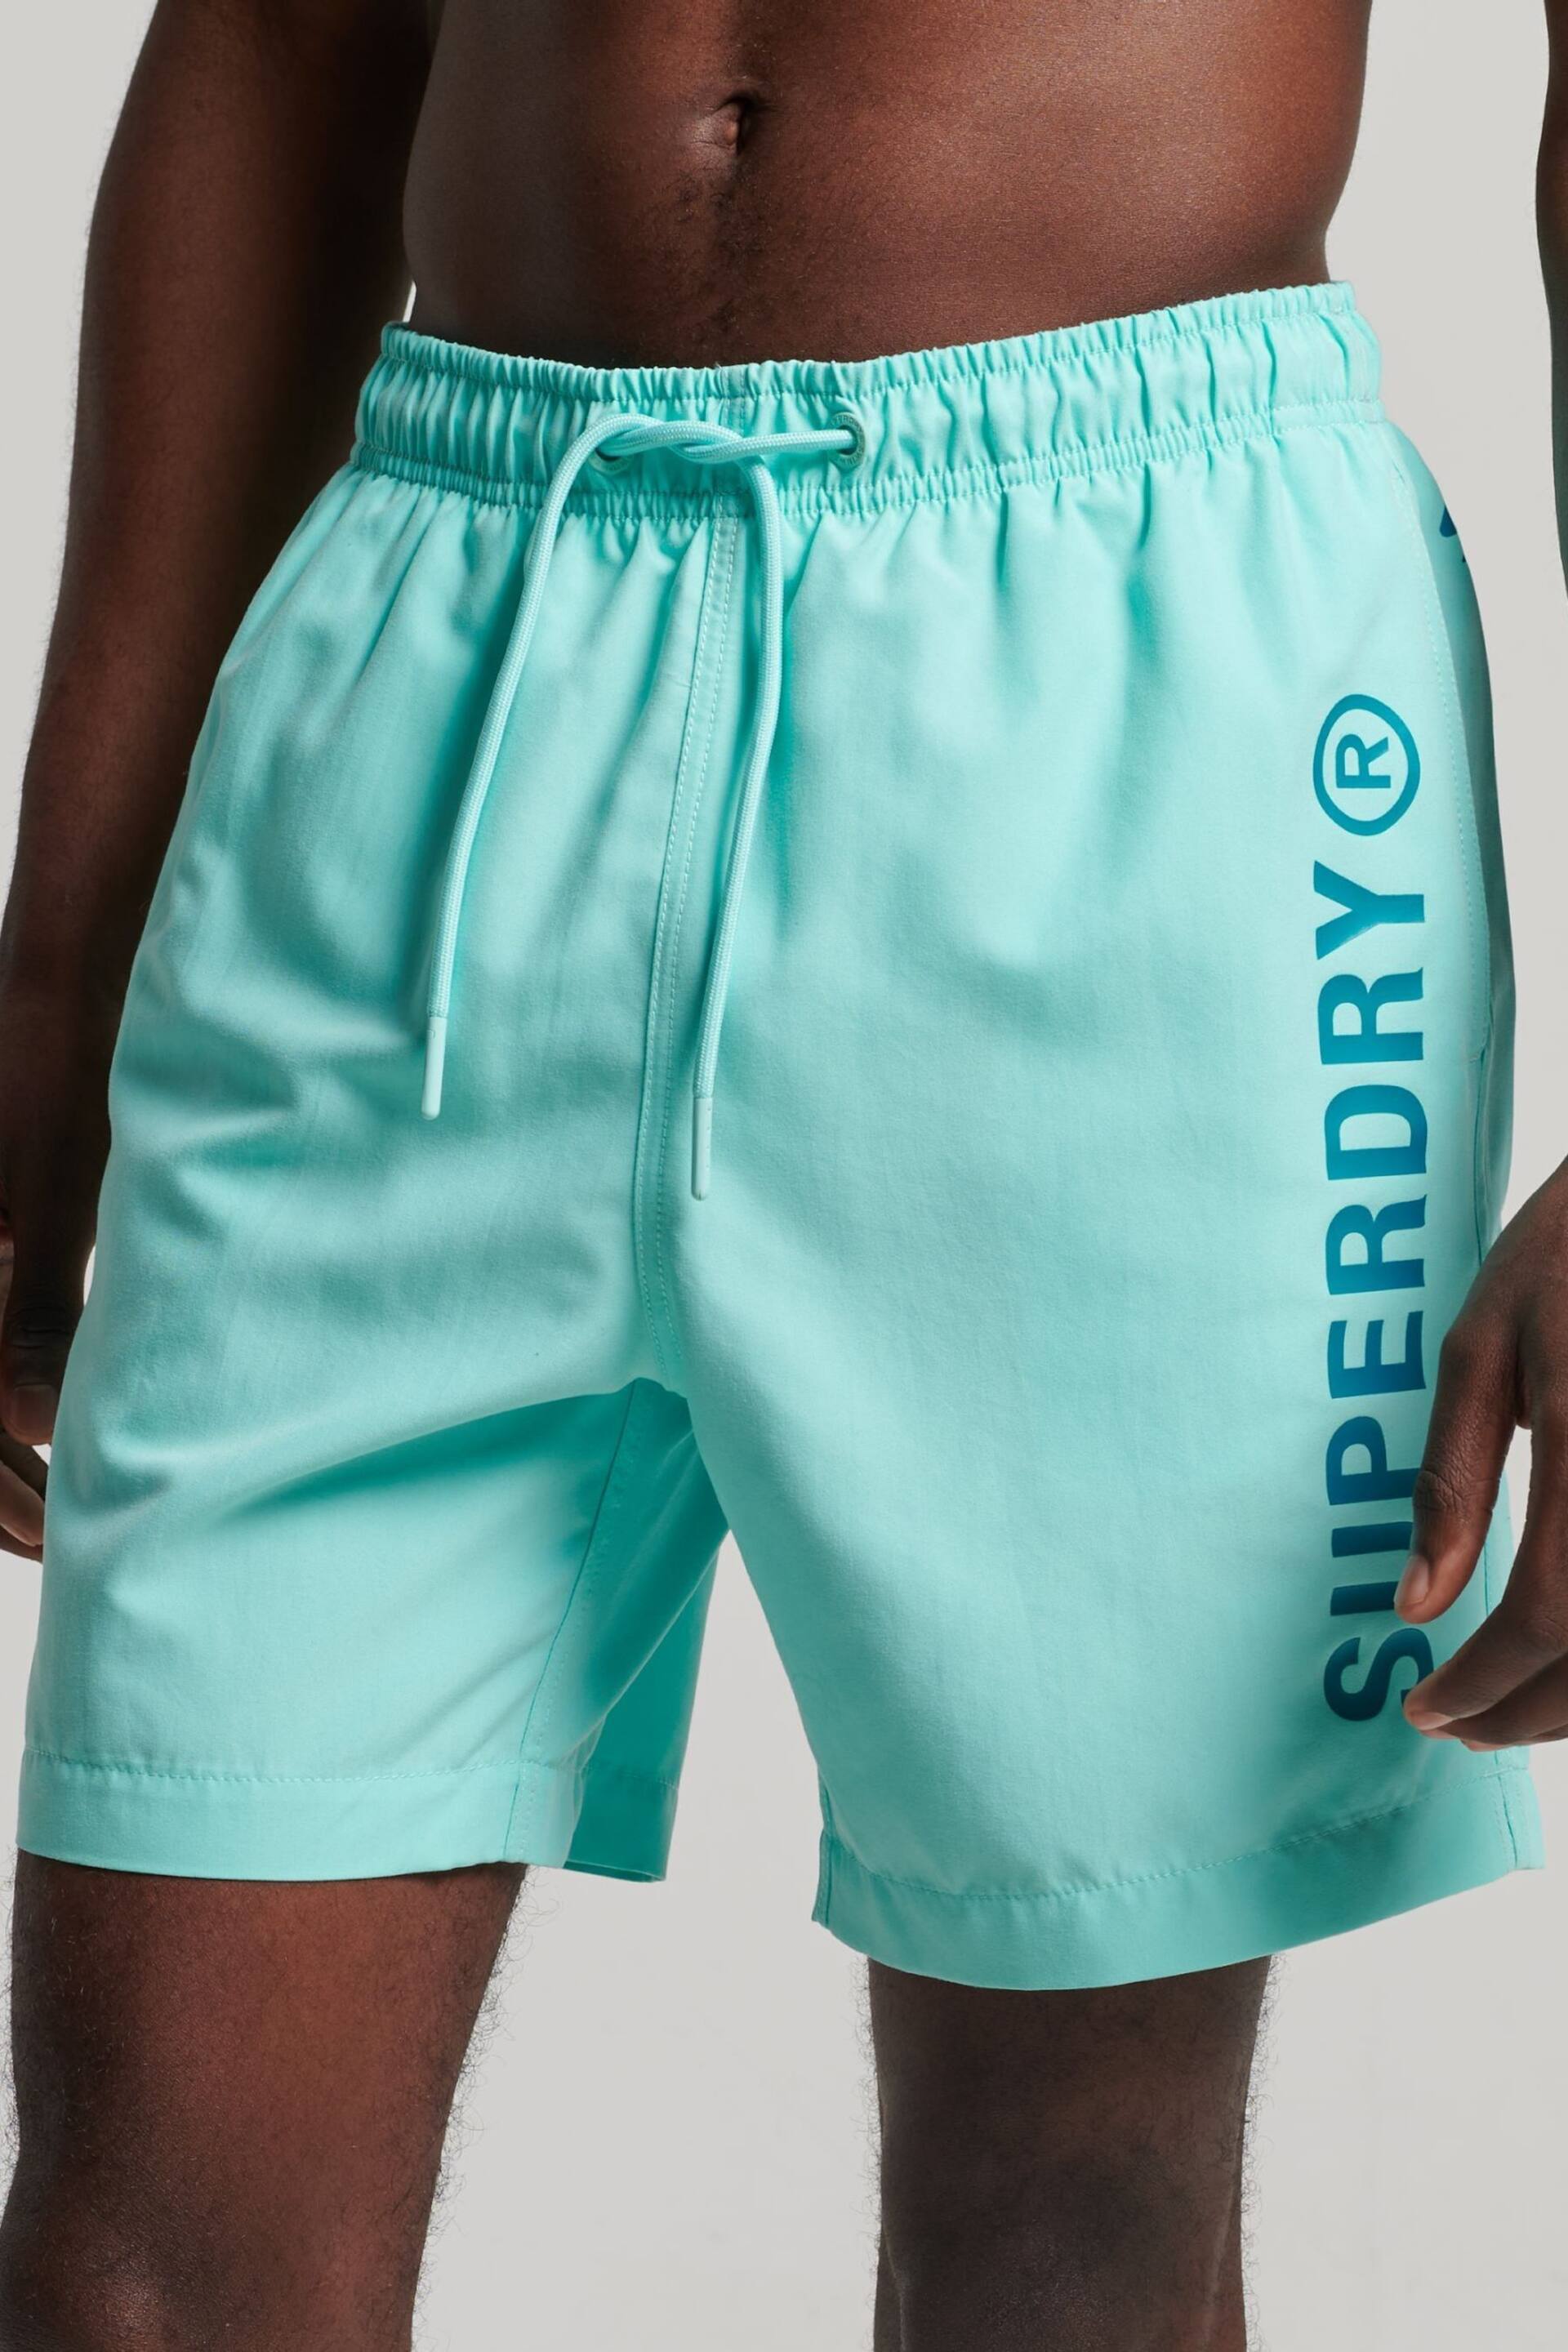 Superdry Blue Core Sport 17 Inch Swim Shorts - Image 1 of 4